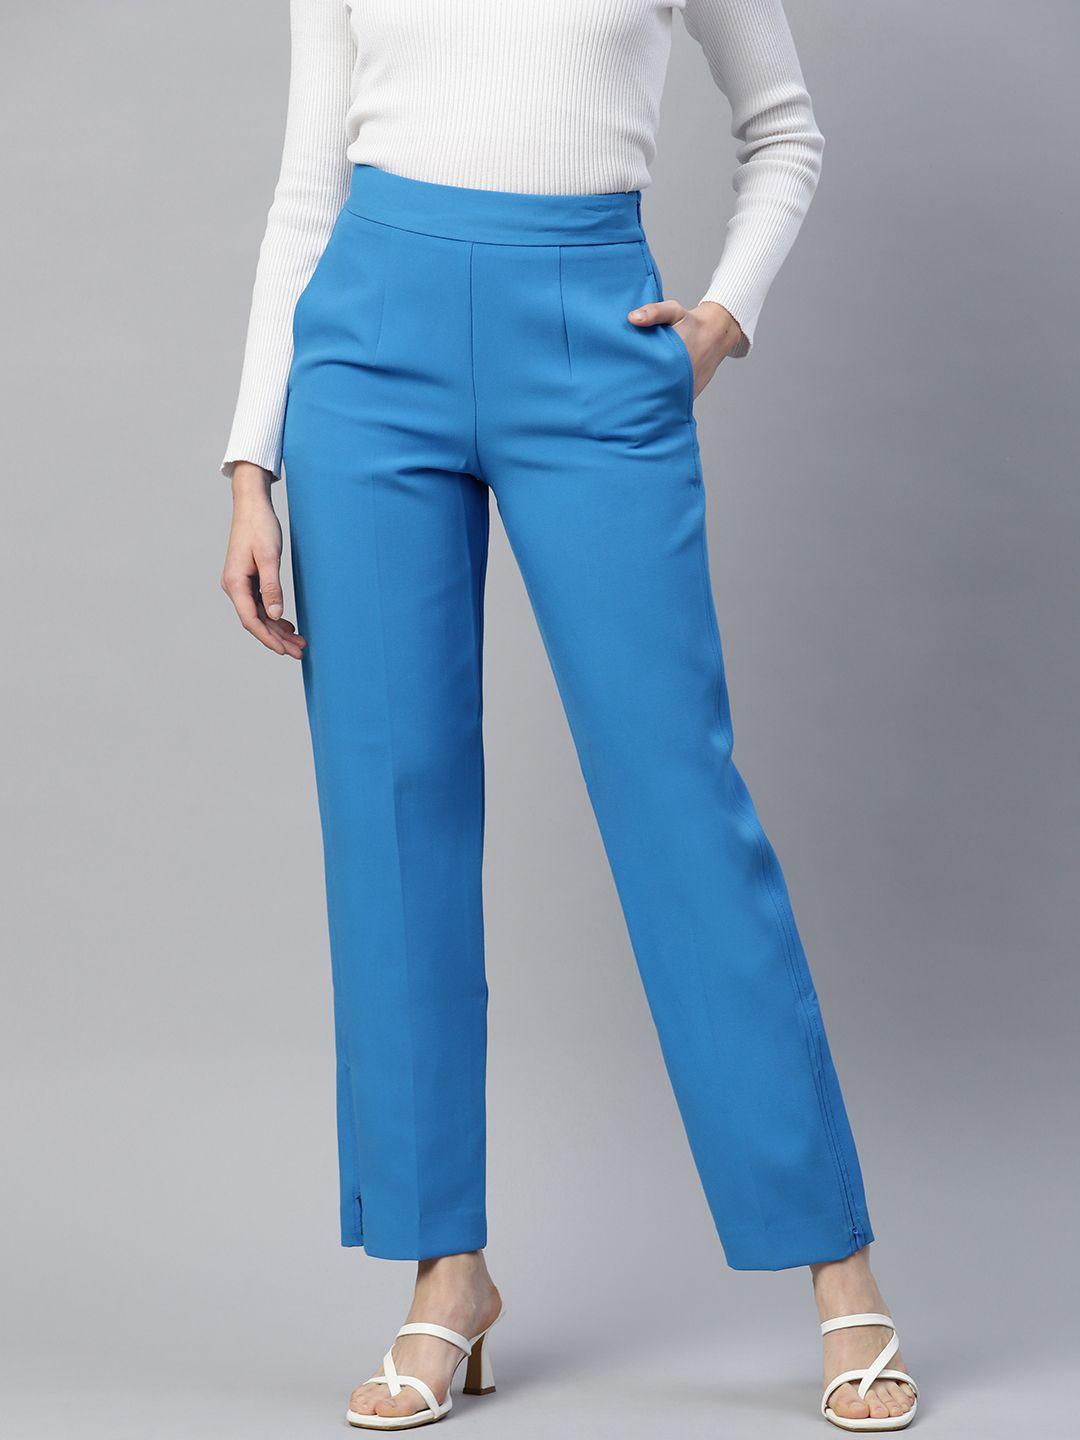 marks & spencer women blue high-rise trousers